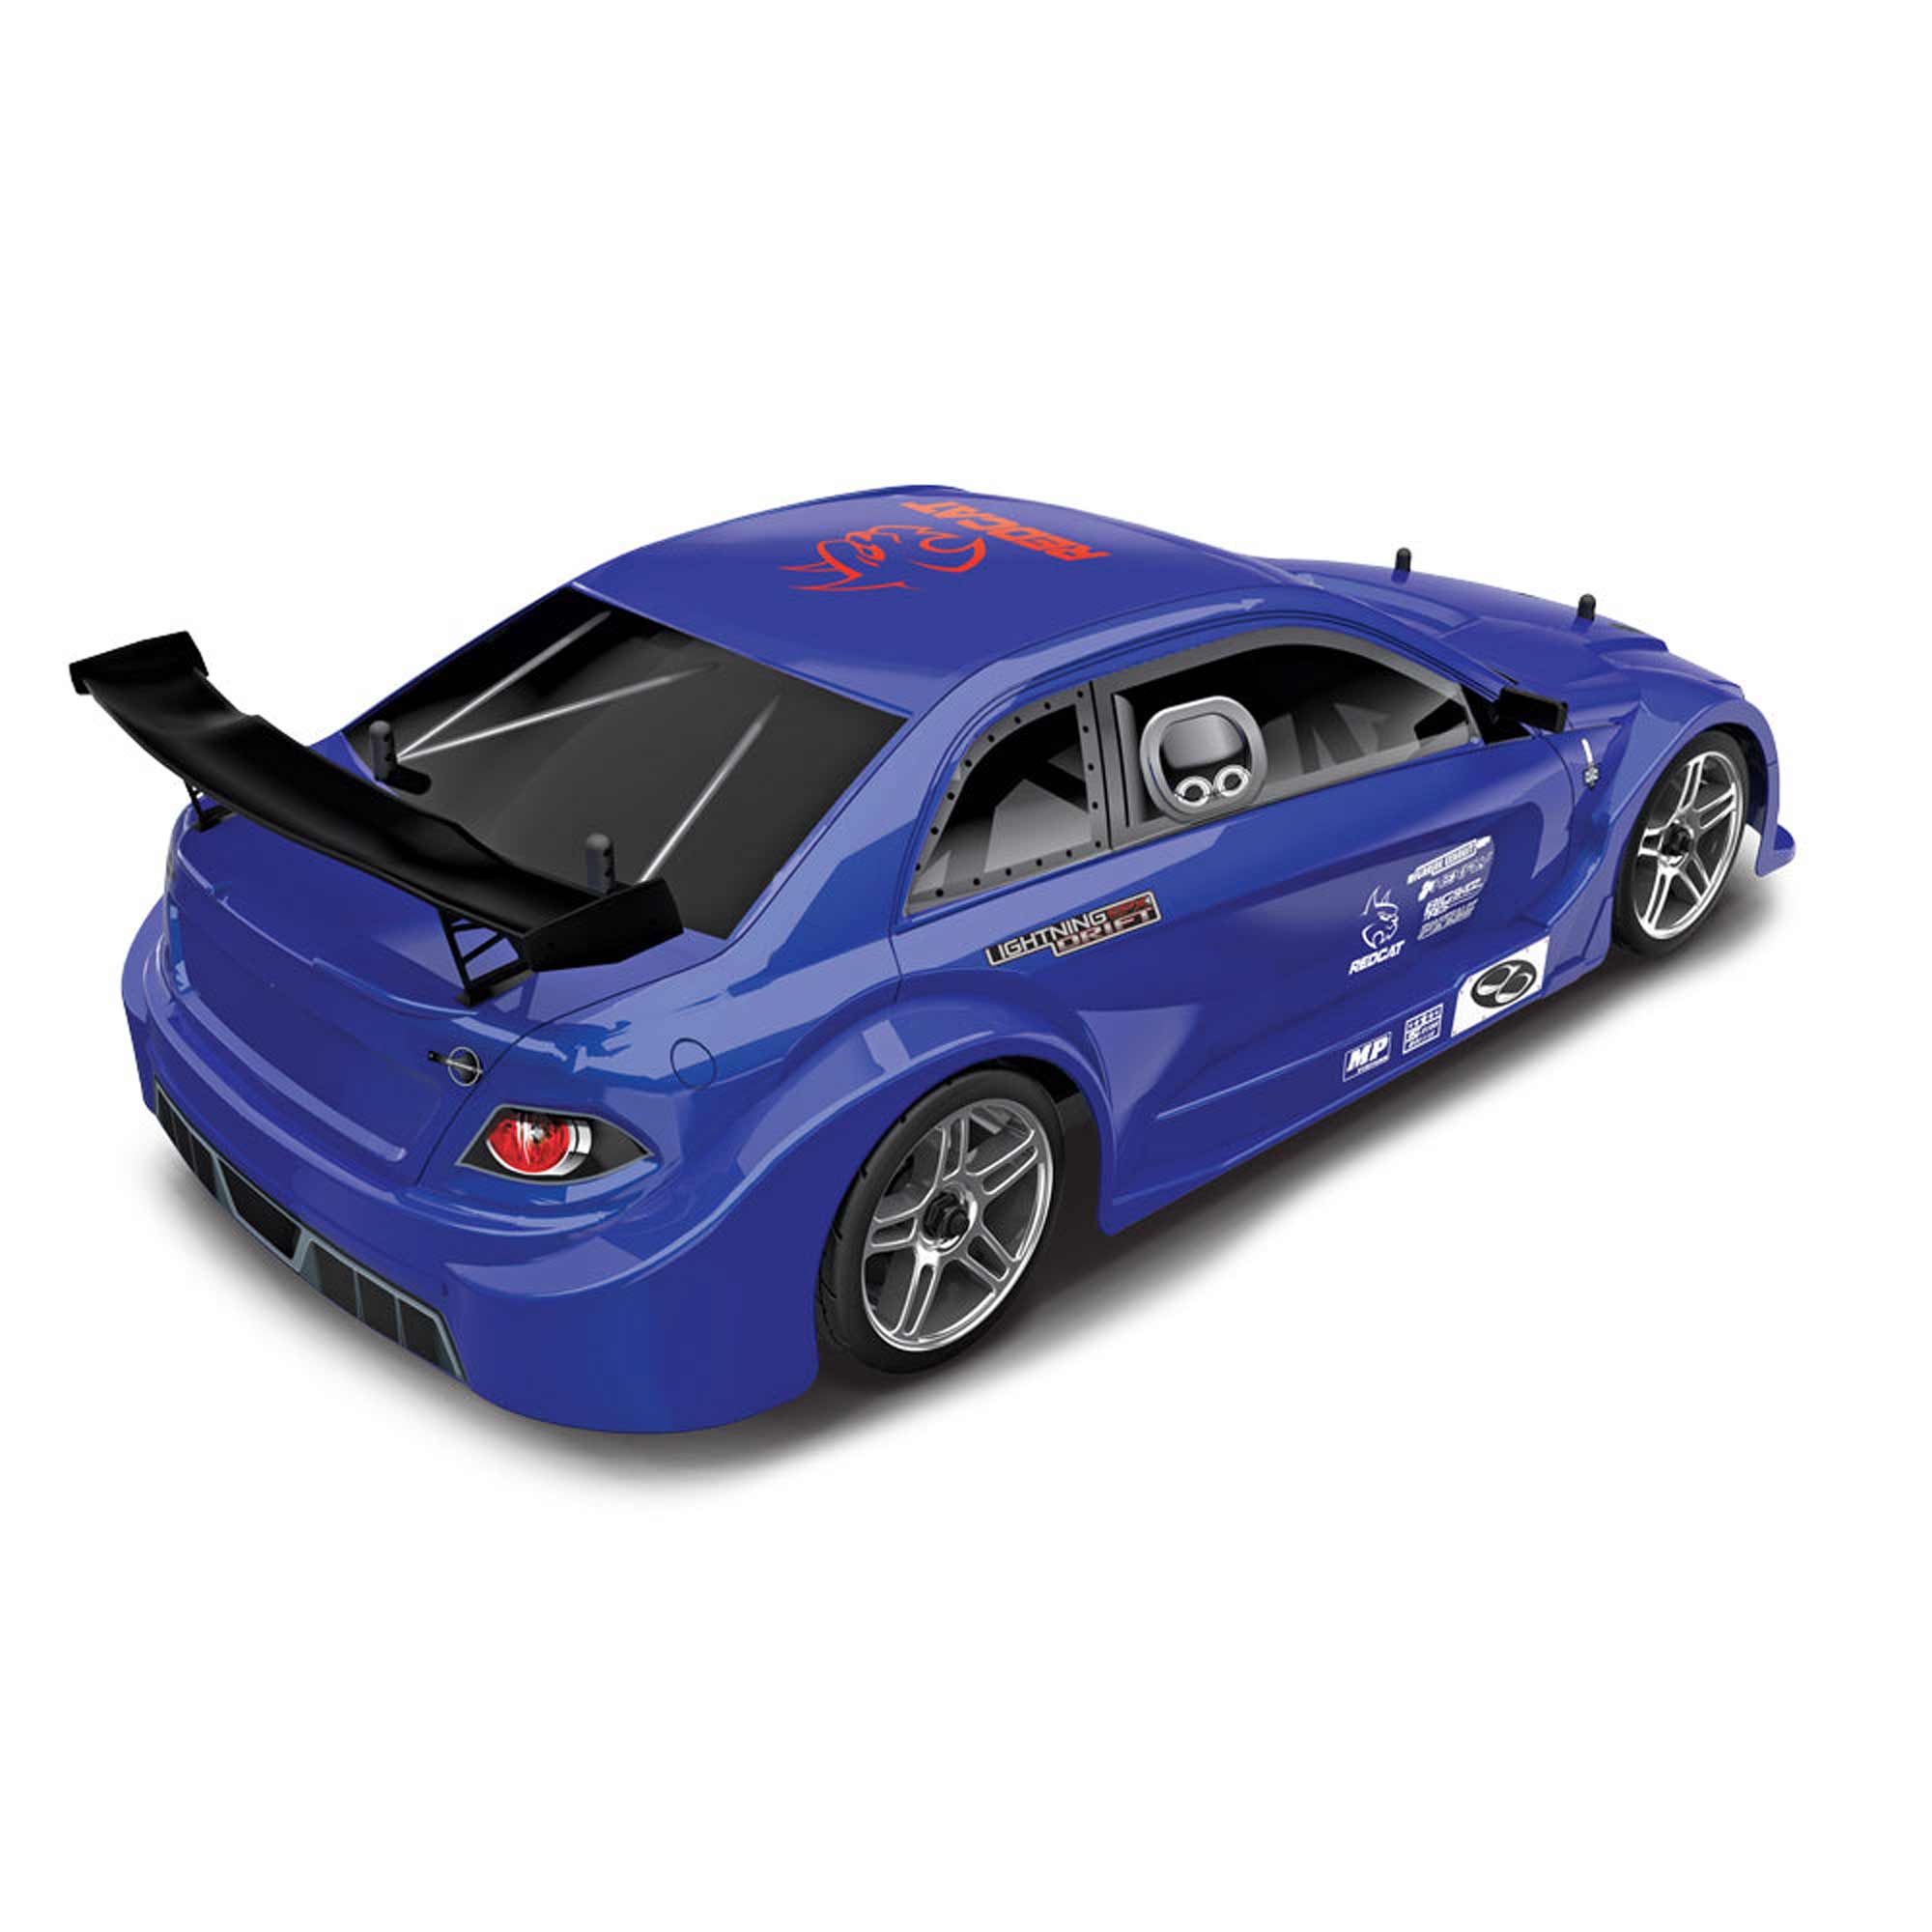 Redcat Racing 1/10 Lightning EPX Drift 4 Wheel Drive Brushed RTR Ready to Run Blue RER08003 Cars Electric RTR 1/10 Off-Road - image 4 of 11